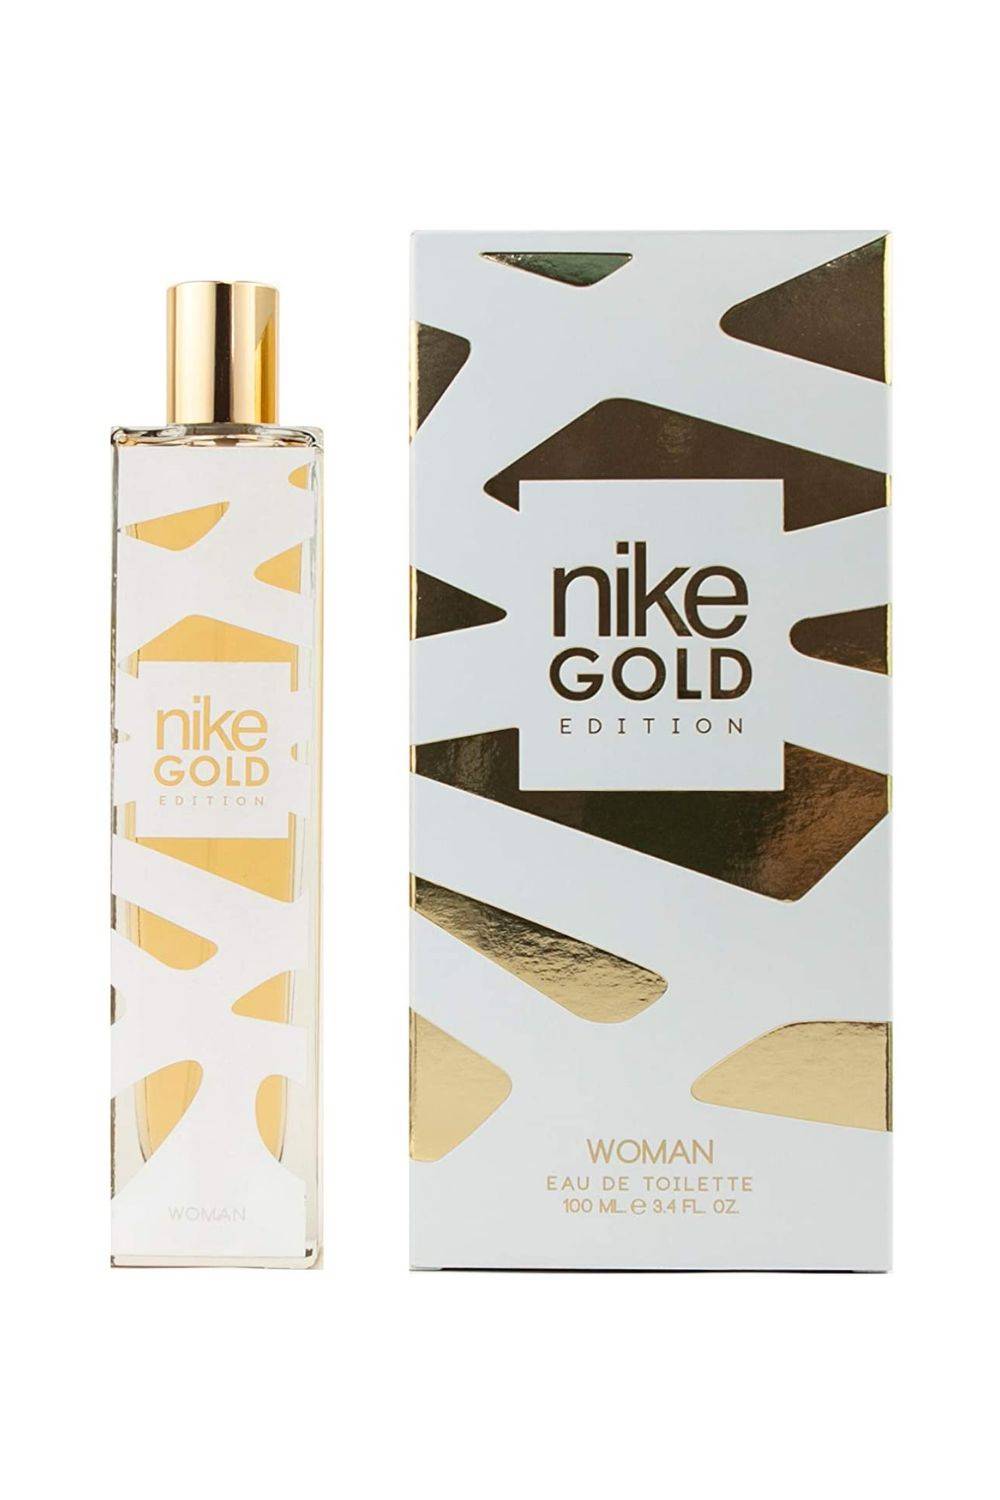 PERFUMES DULCES: NIKE GOLD